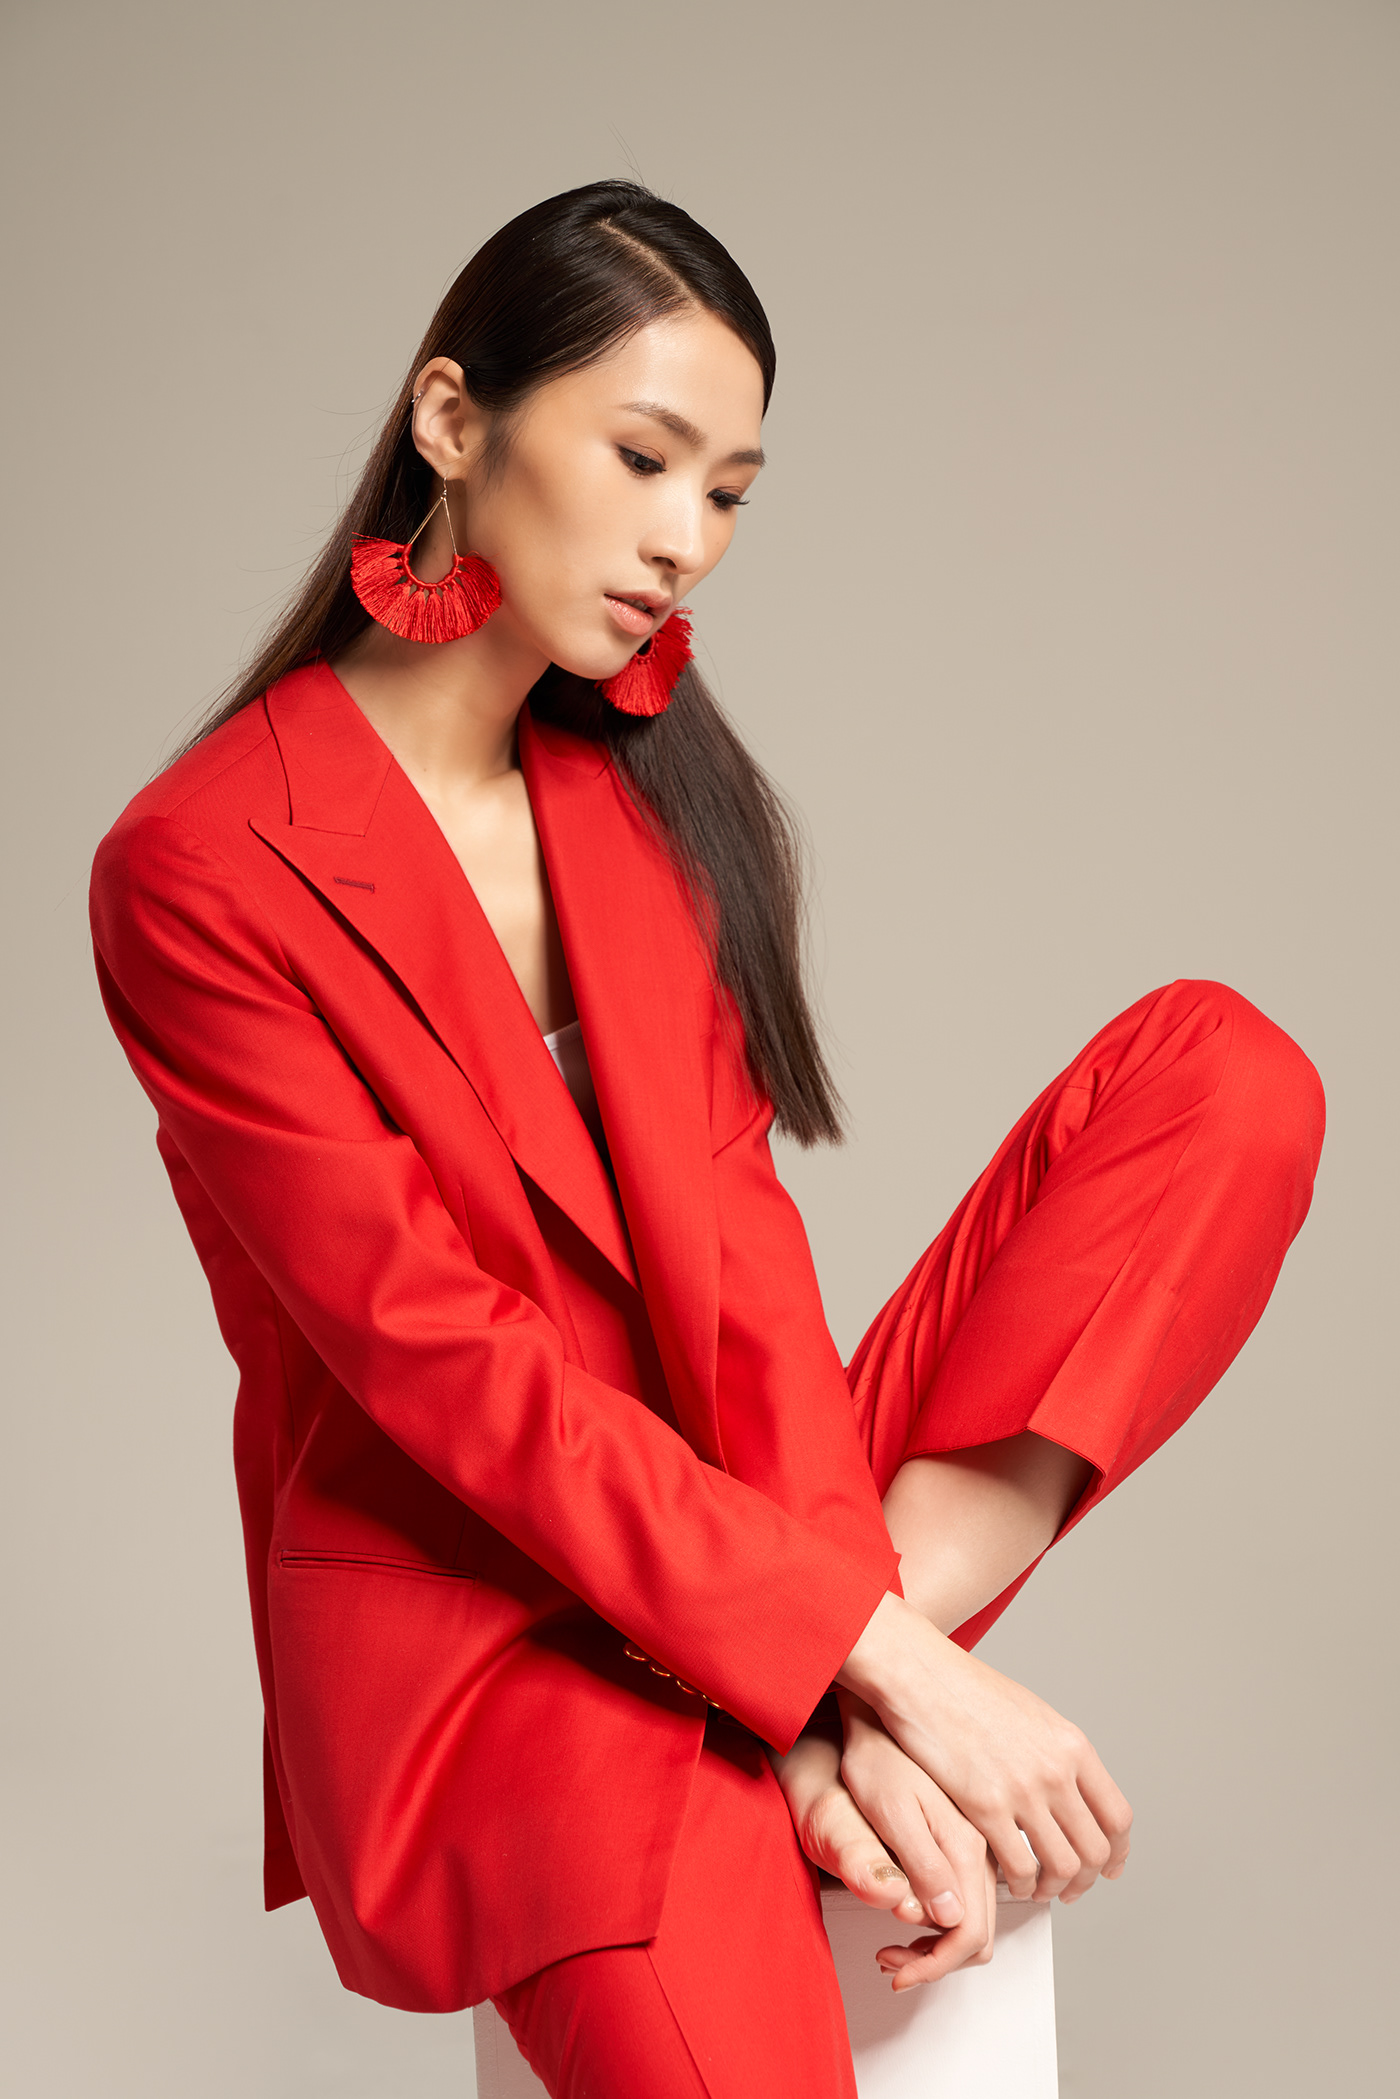 The red suit on Behance